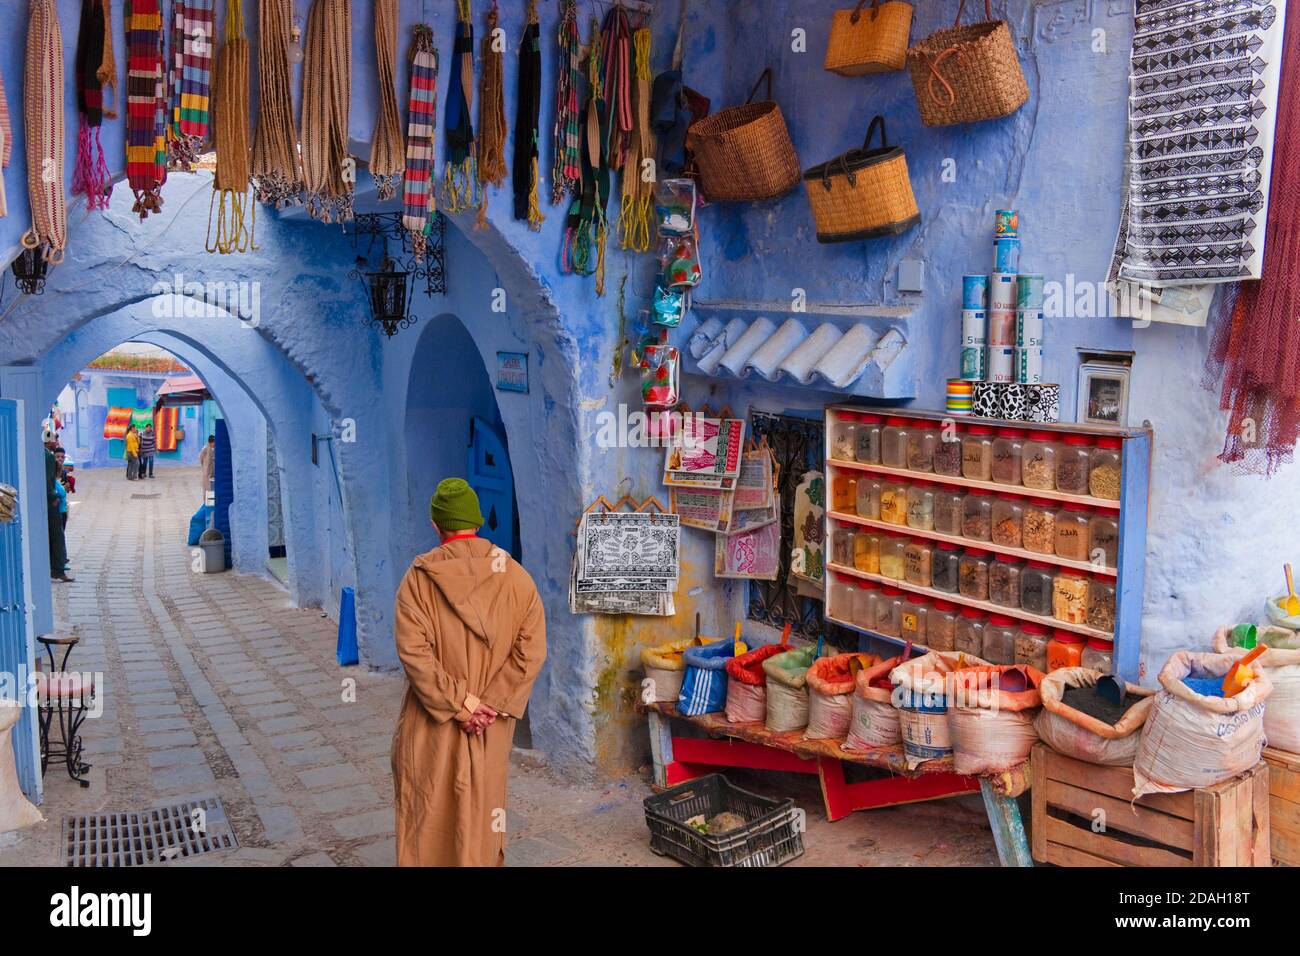 Street view, Chefchaouen, Morocco Stock Photo